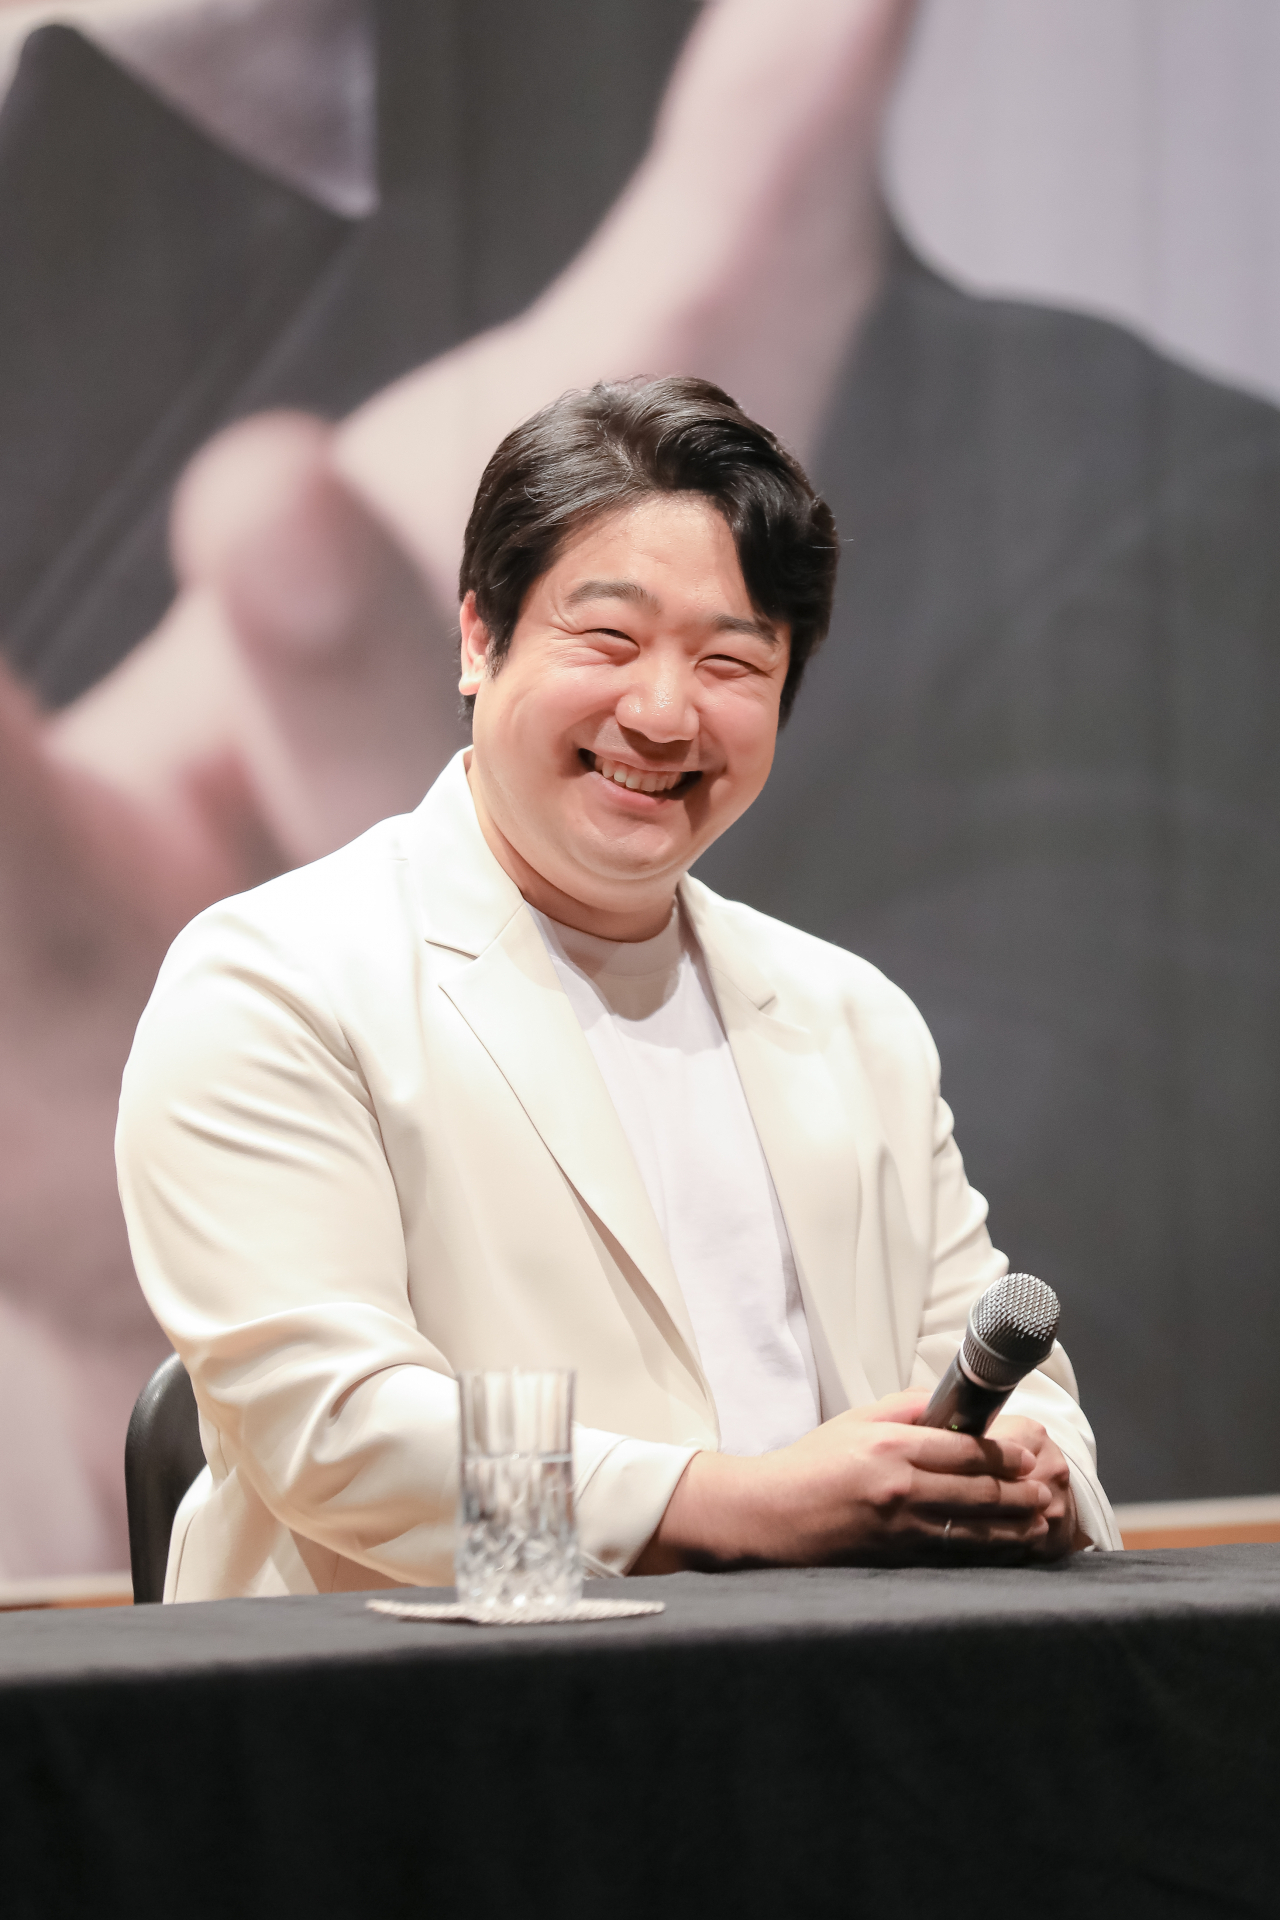 South Korean baritone Kim Gi-hoon smiles during an interview in Seoul on Tuesday. (Arts and Artists)